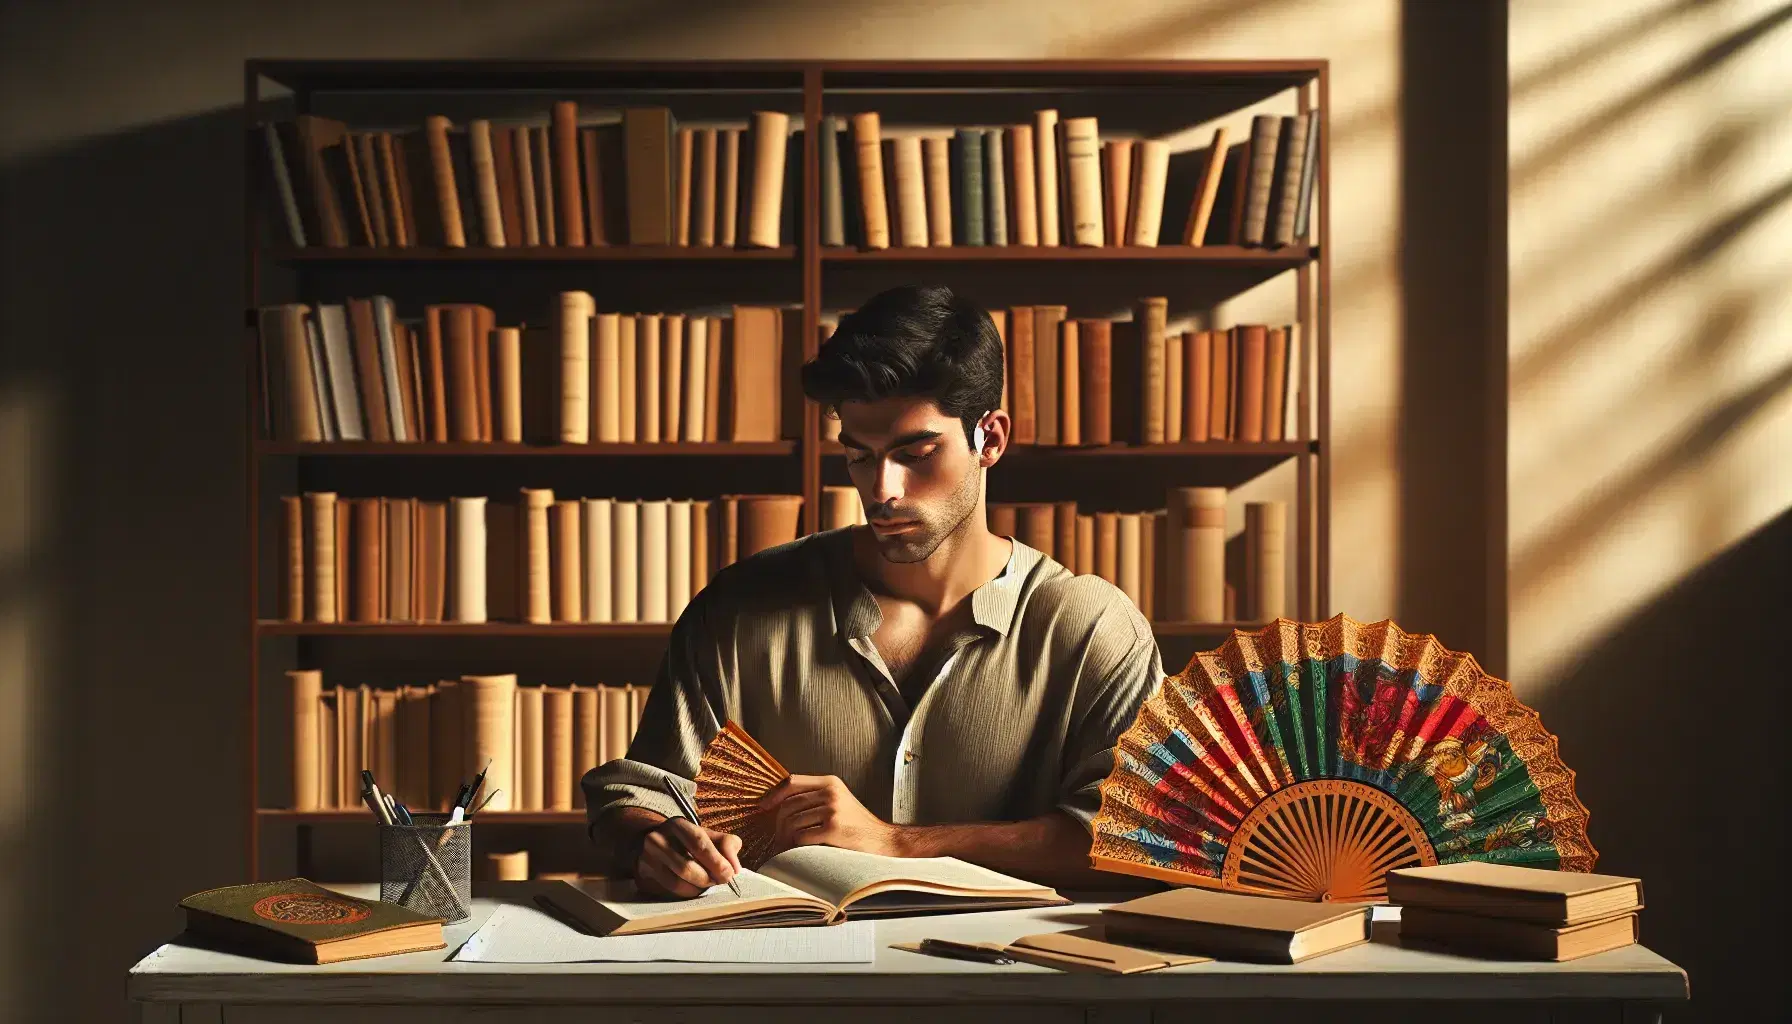 Middle-Eastern man studying at desk with textbook, pen, blank notebook, and colorful Spanish fan, against a backdrop of assorted books.